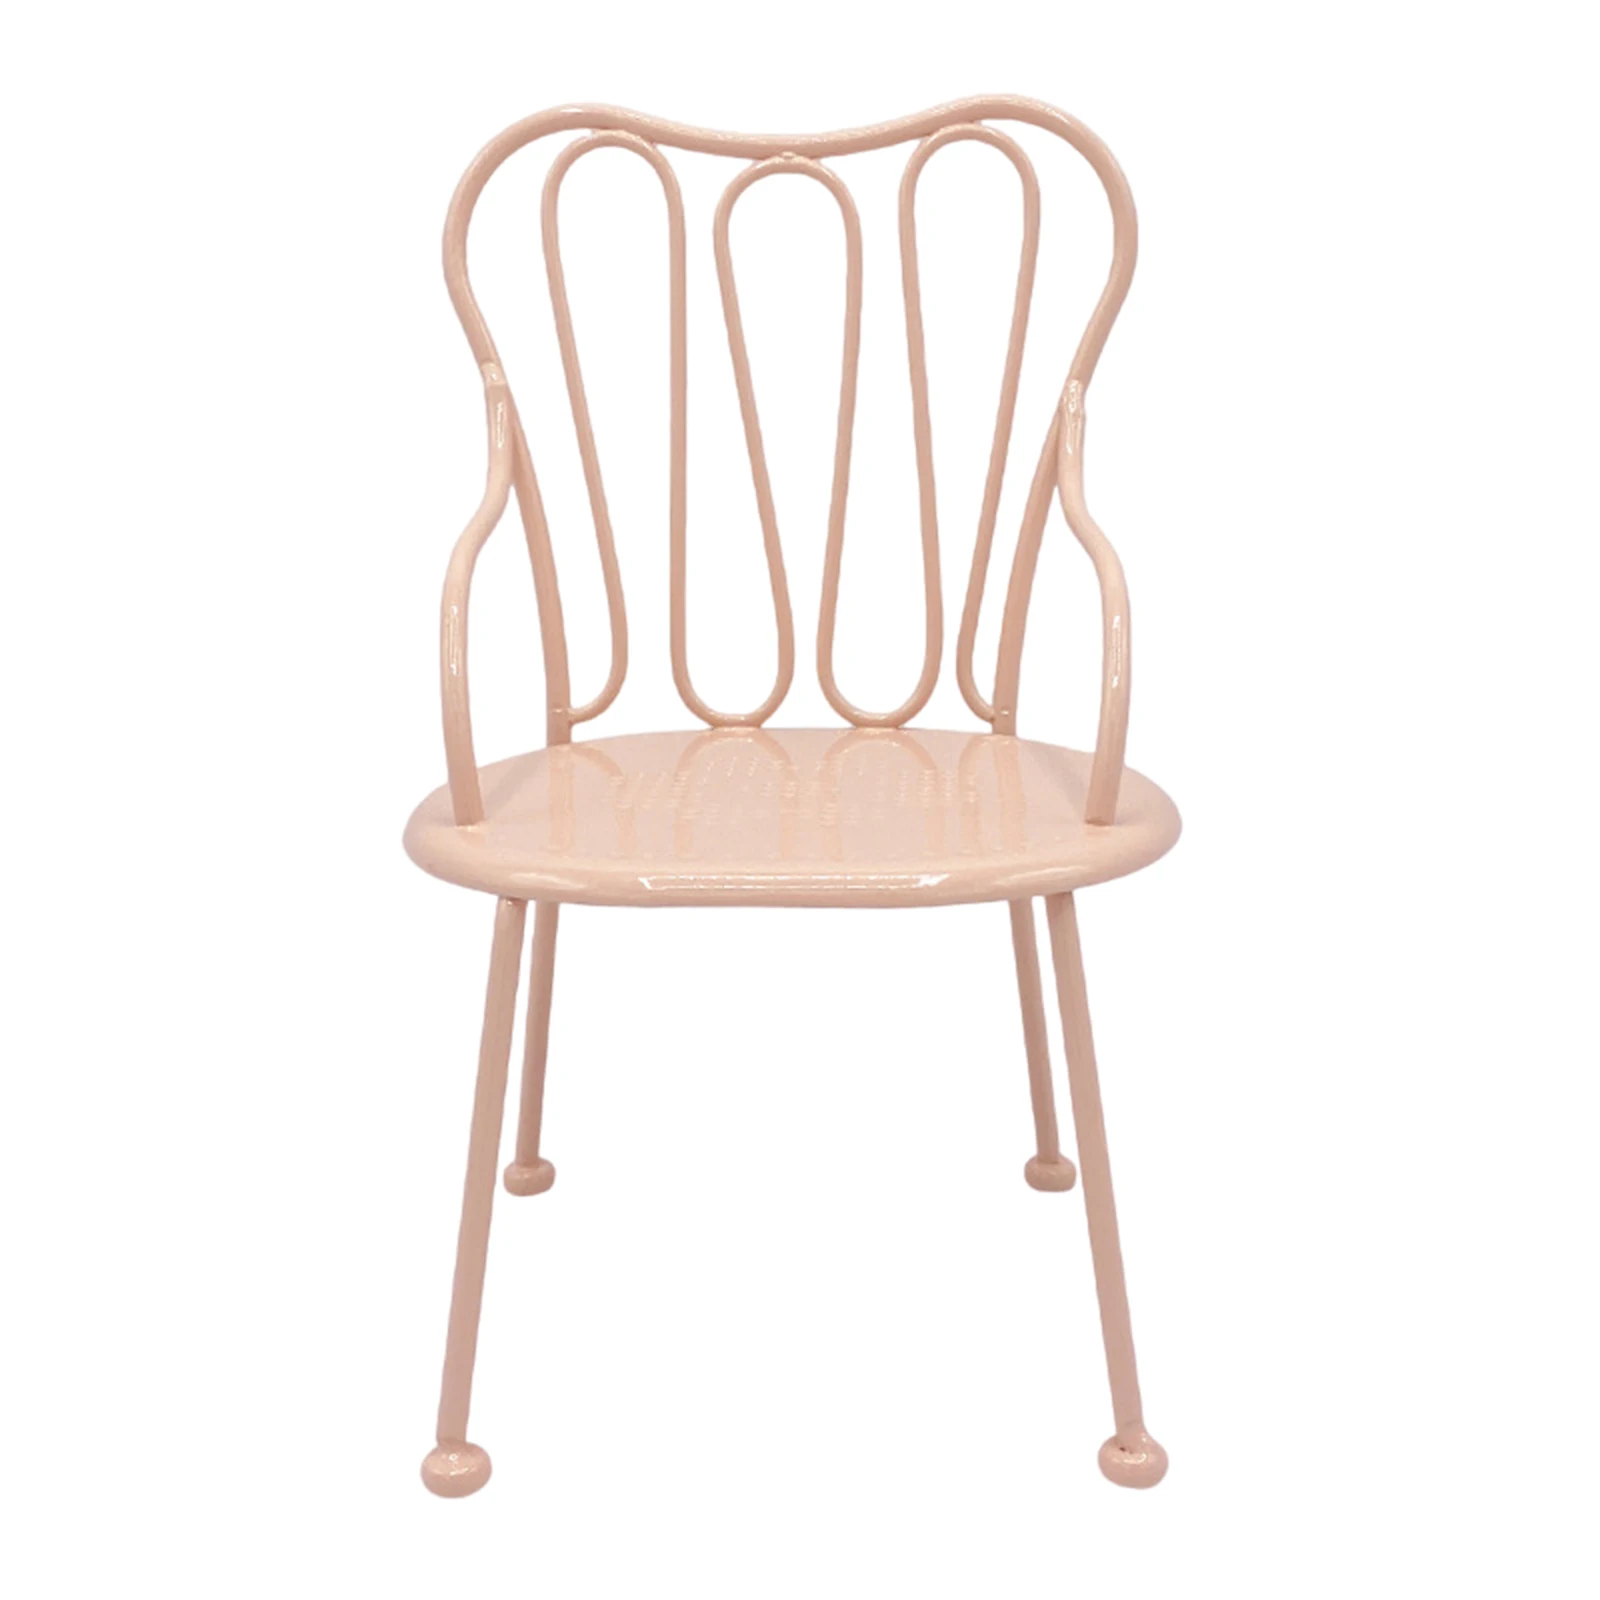 Dining Chair Home Dining Room Furniture for 1:16 Blythe Doll Toys Decoration